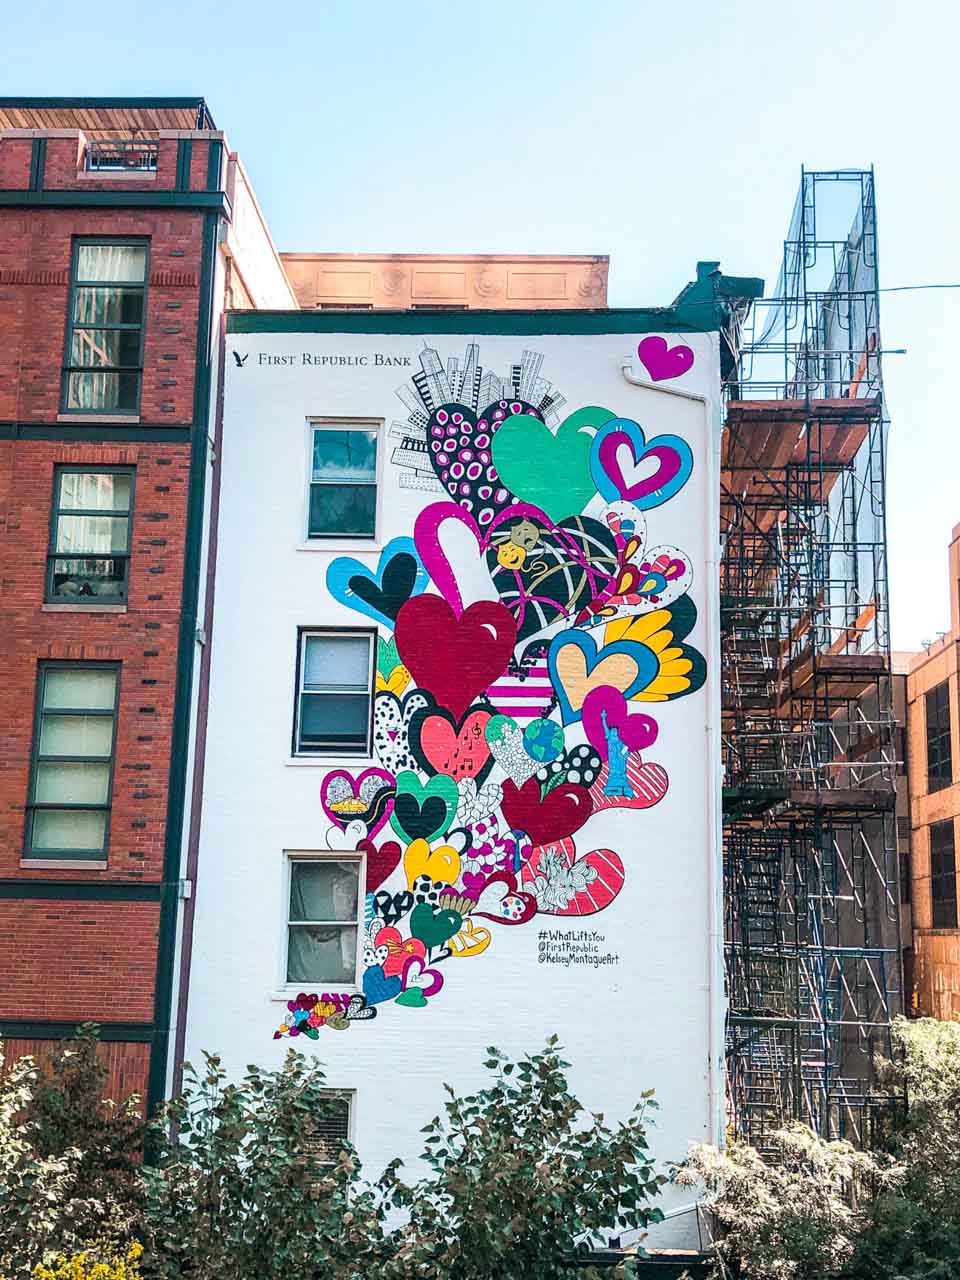 A heart mural by Kelsey Montague on the High Line